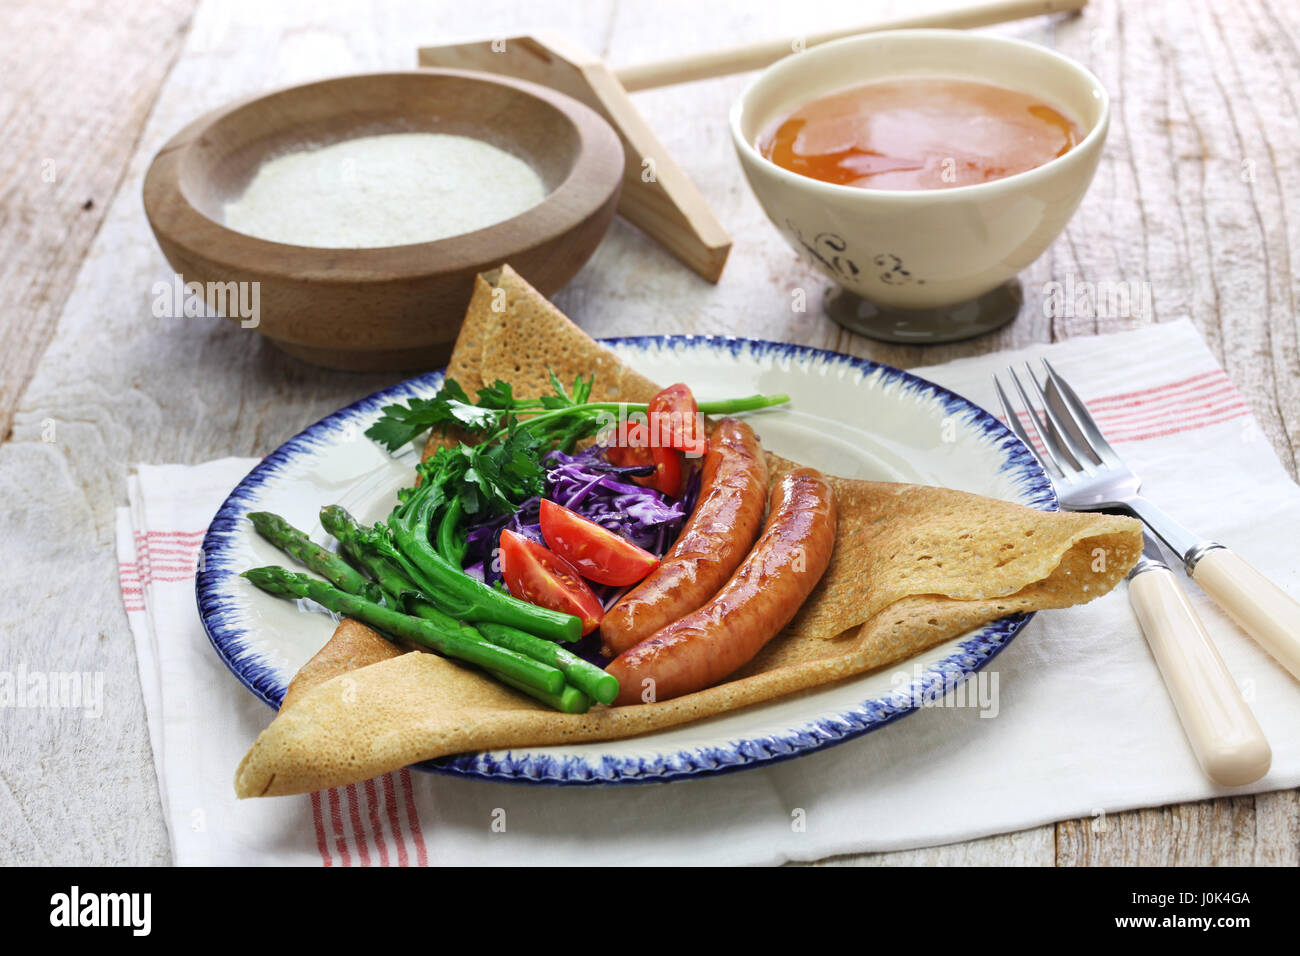 galette du triangle, buckwheat crepe, french brittany cuisine Stock Photo